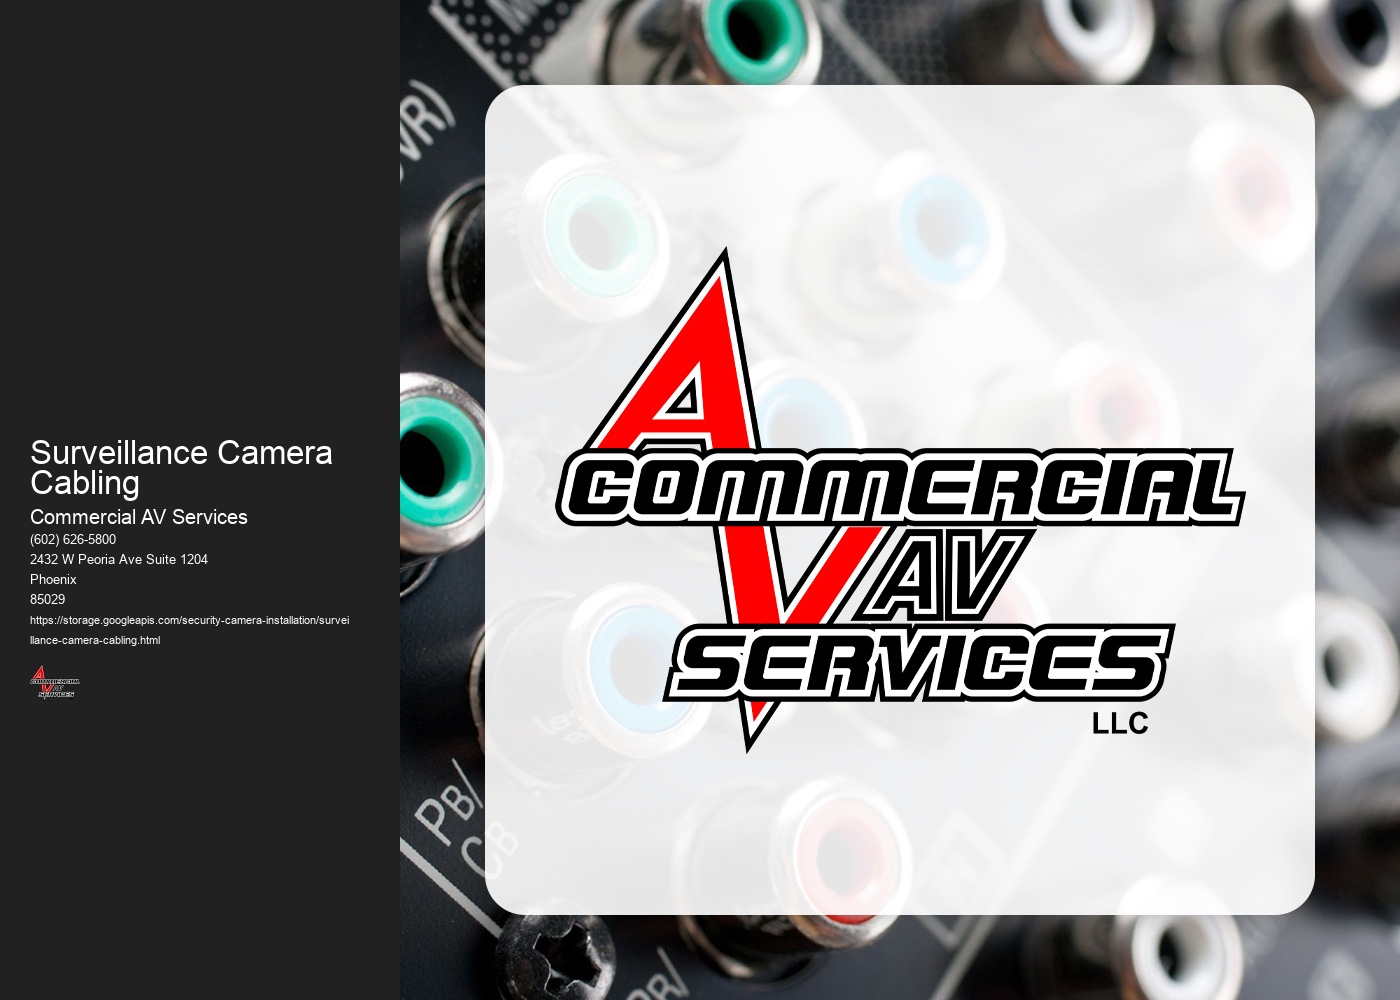 What are the best practices for cable management when installing surveillance cameras?